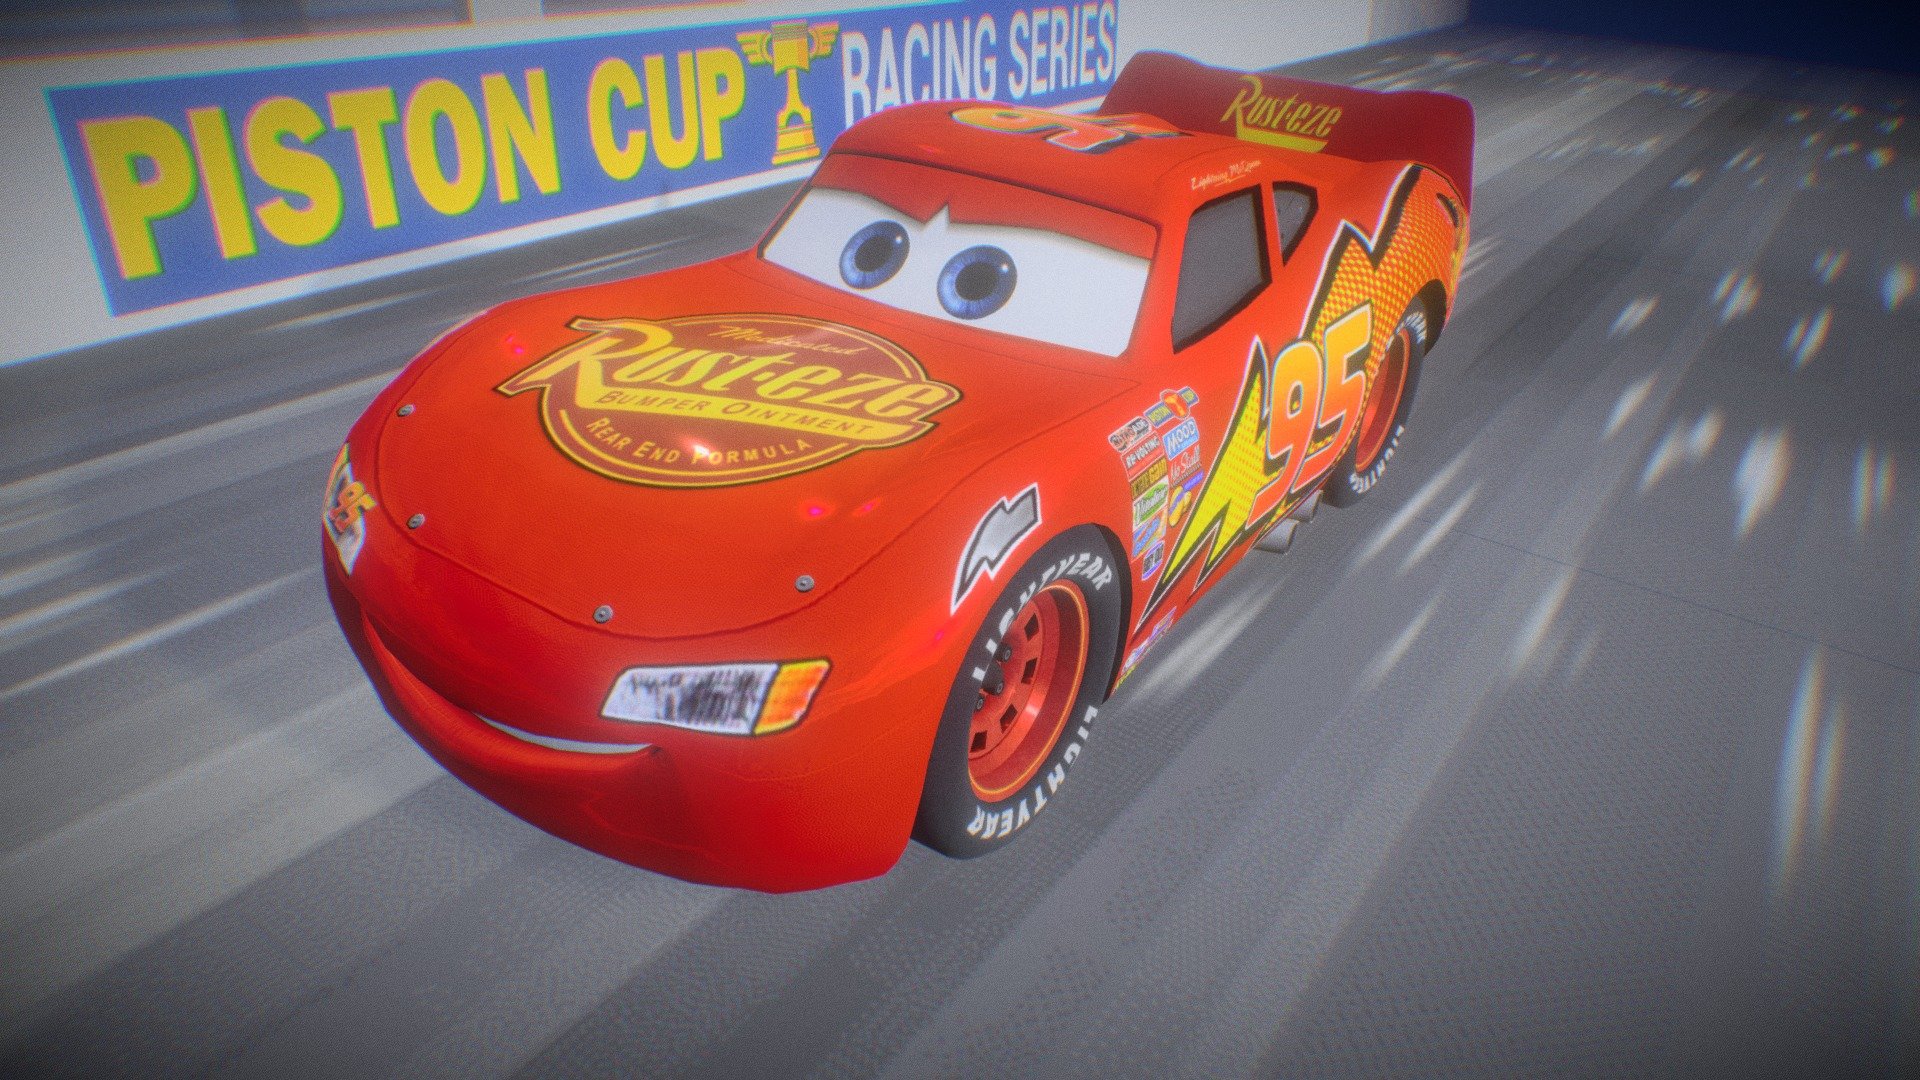 Here's a tribute to Pixar with a low poly recreation of Lightning McQueen from Cars (2006) in action.
The recreation included an attempt of more accurate details of the paint-job from the first movie, and an extension of racetrack background.
I was fortunate to work as a vehicle / character modeler for THQ on almost all the main cast of Cars WII (2006), and this is me being sentimental down to the memory lane 3d model